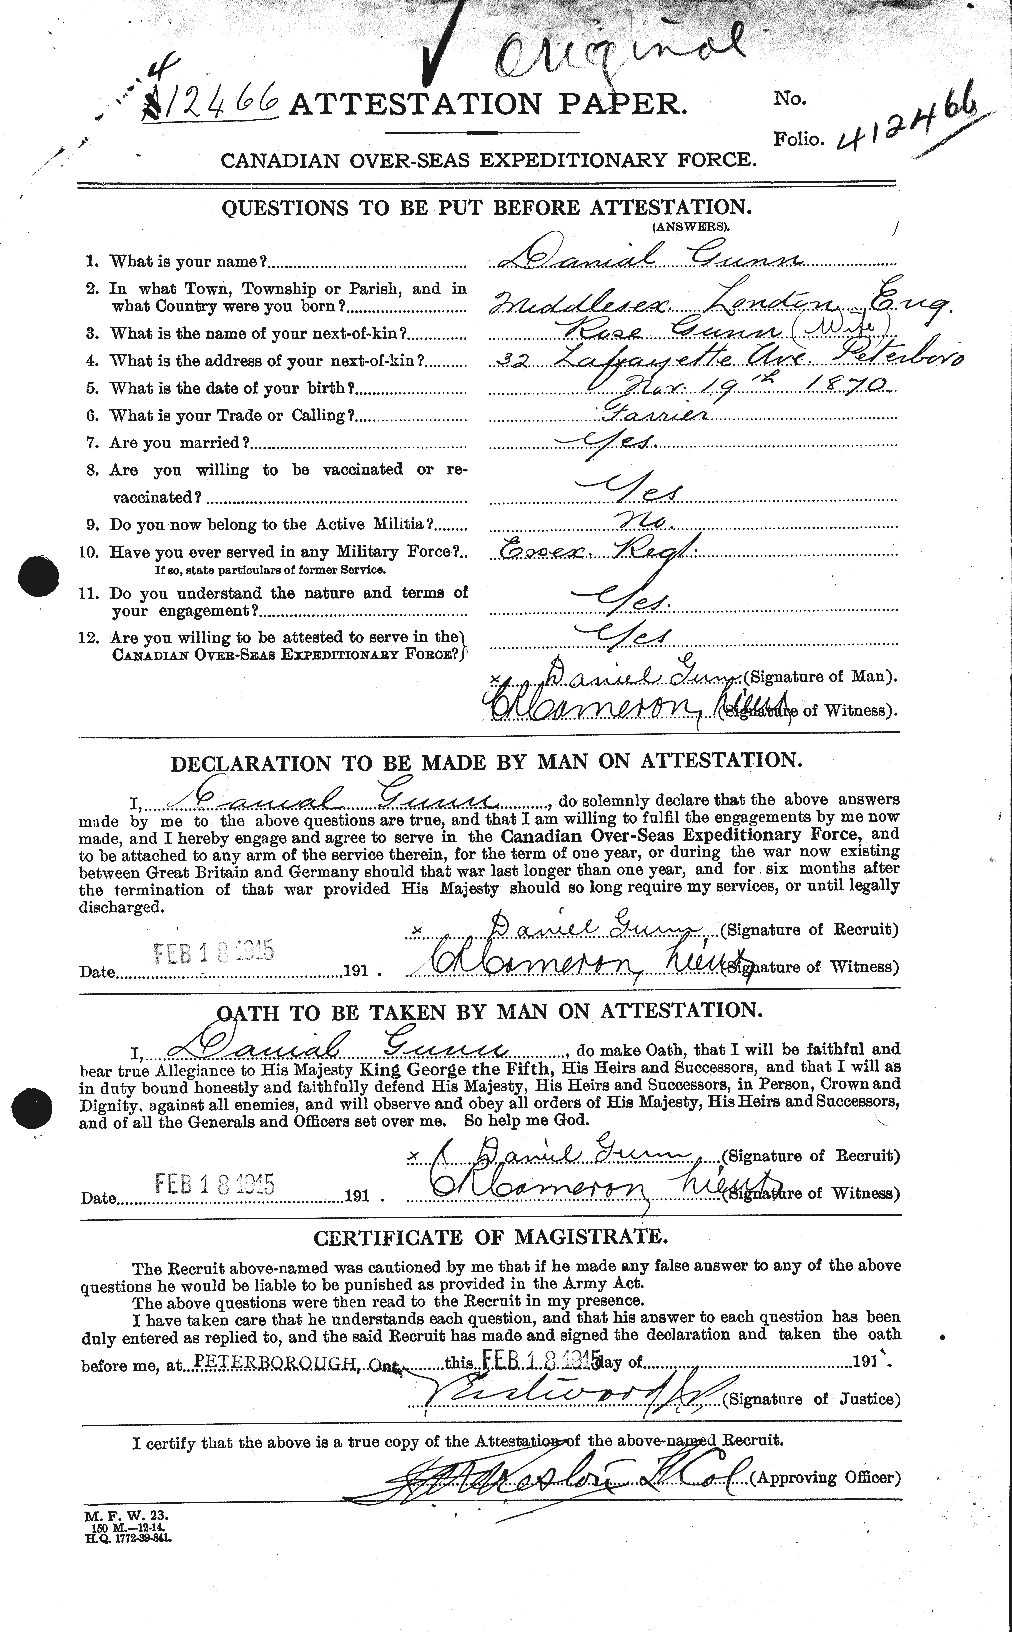 Personnel Records of the First World War - CEF 368015a